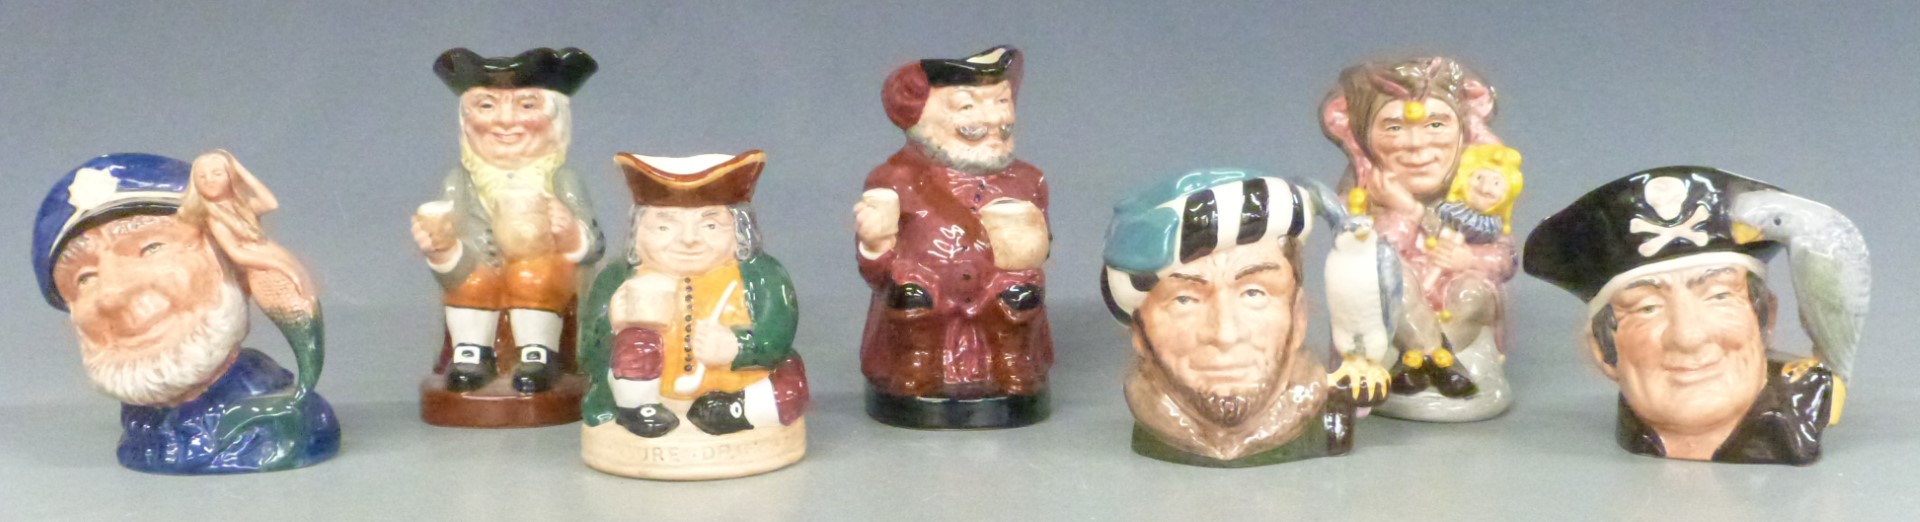 A collection of Royal Doulton small character and Toby jugs including Jester, Winston Churchill, two - Image 2 of 4